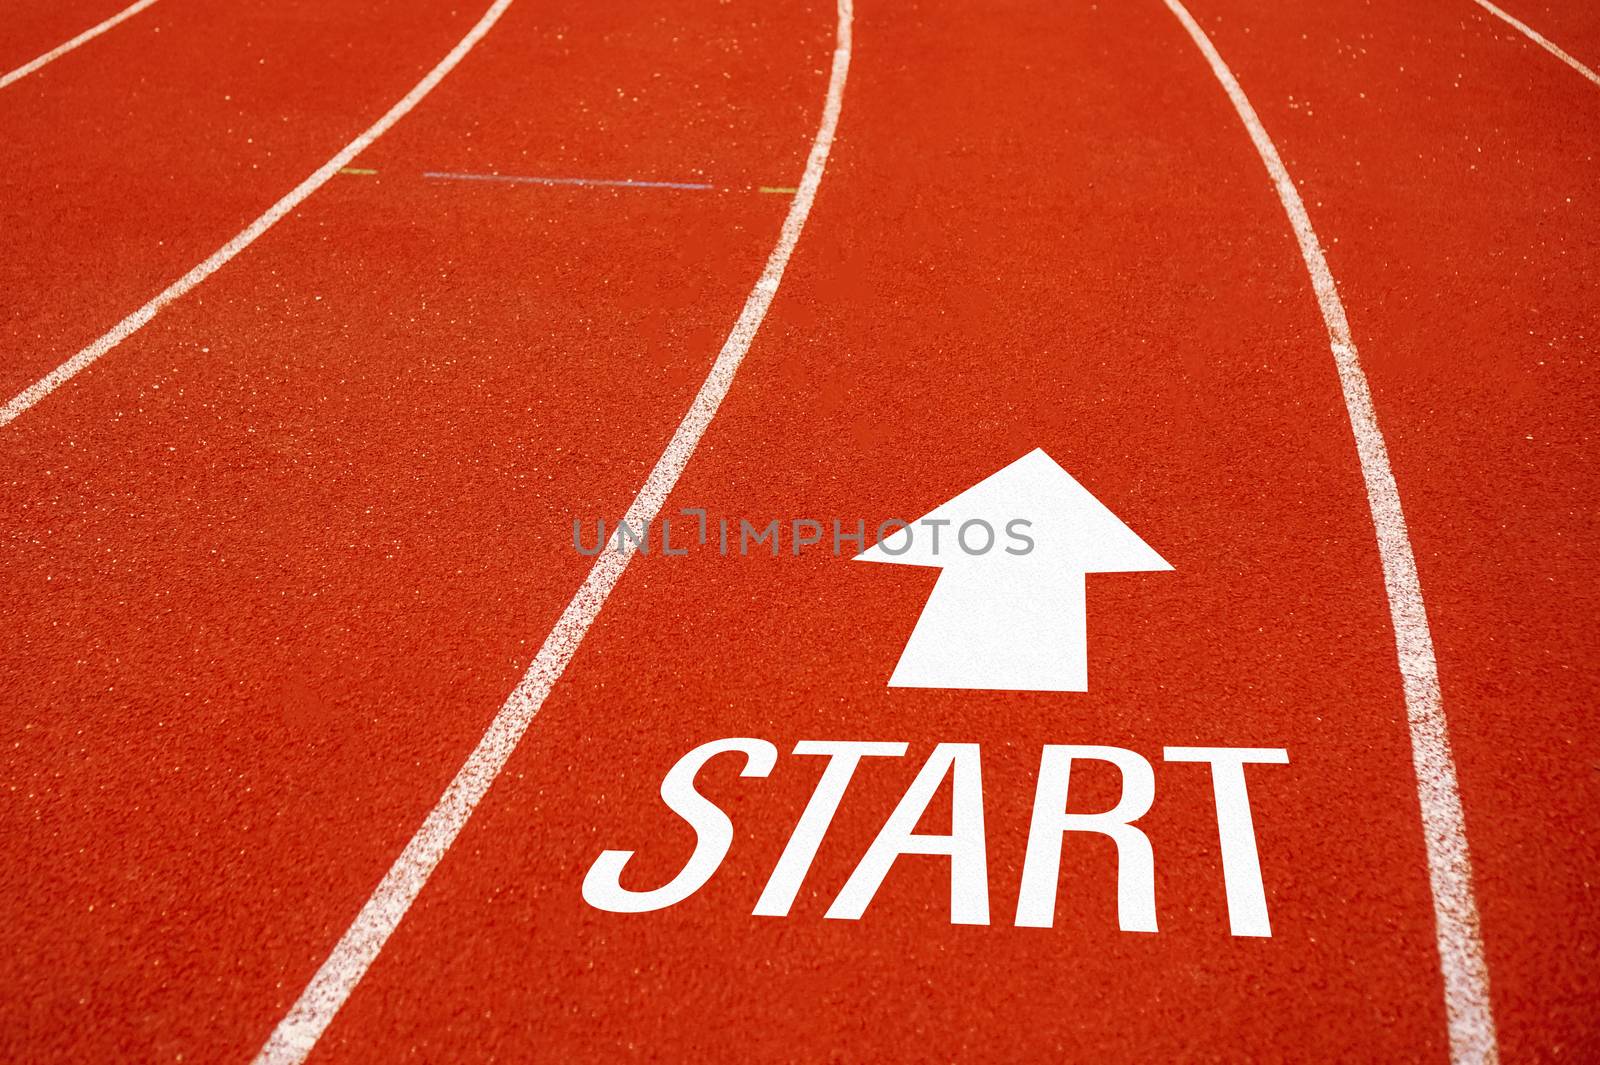 Start line on running court represents the beginning of a journey to the destination in business planning, strategy and challenge or career path, opportunity concept.